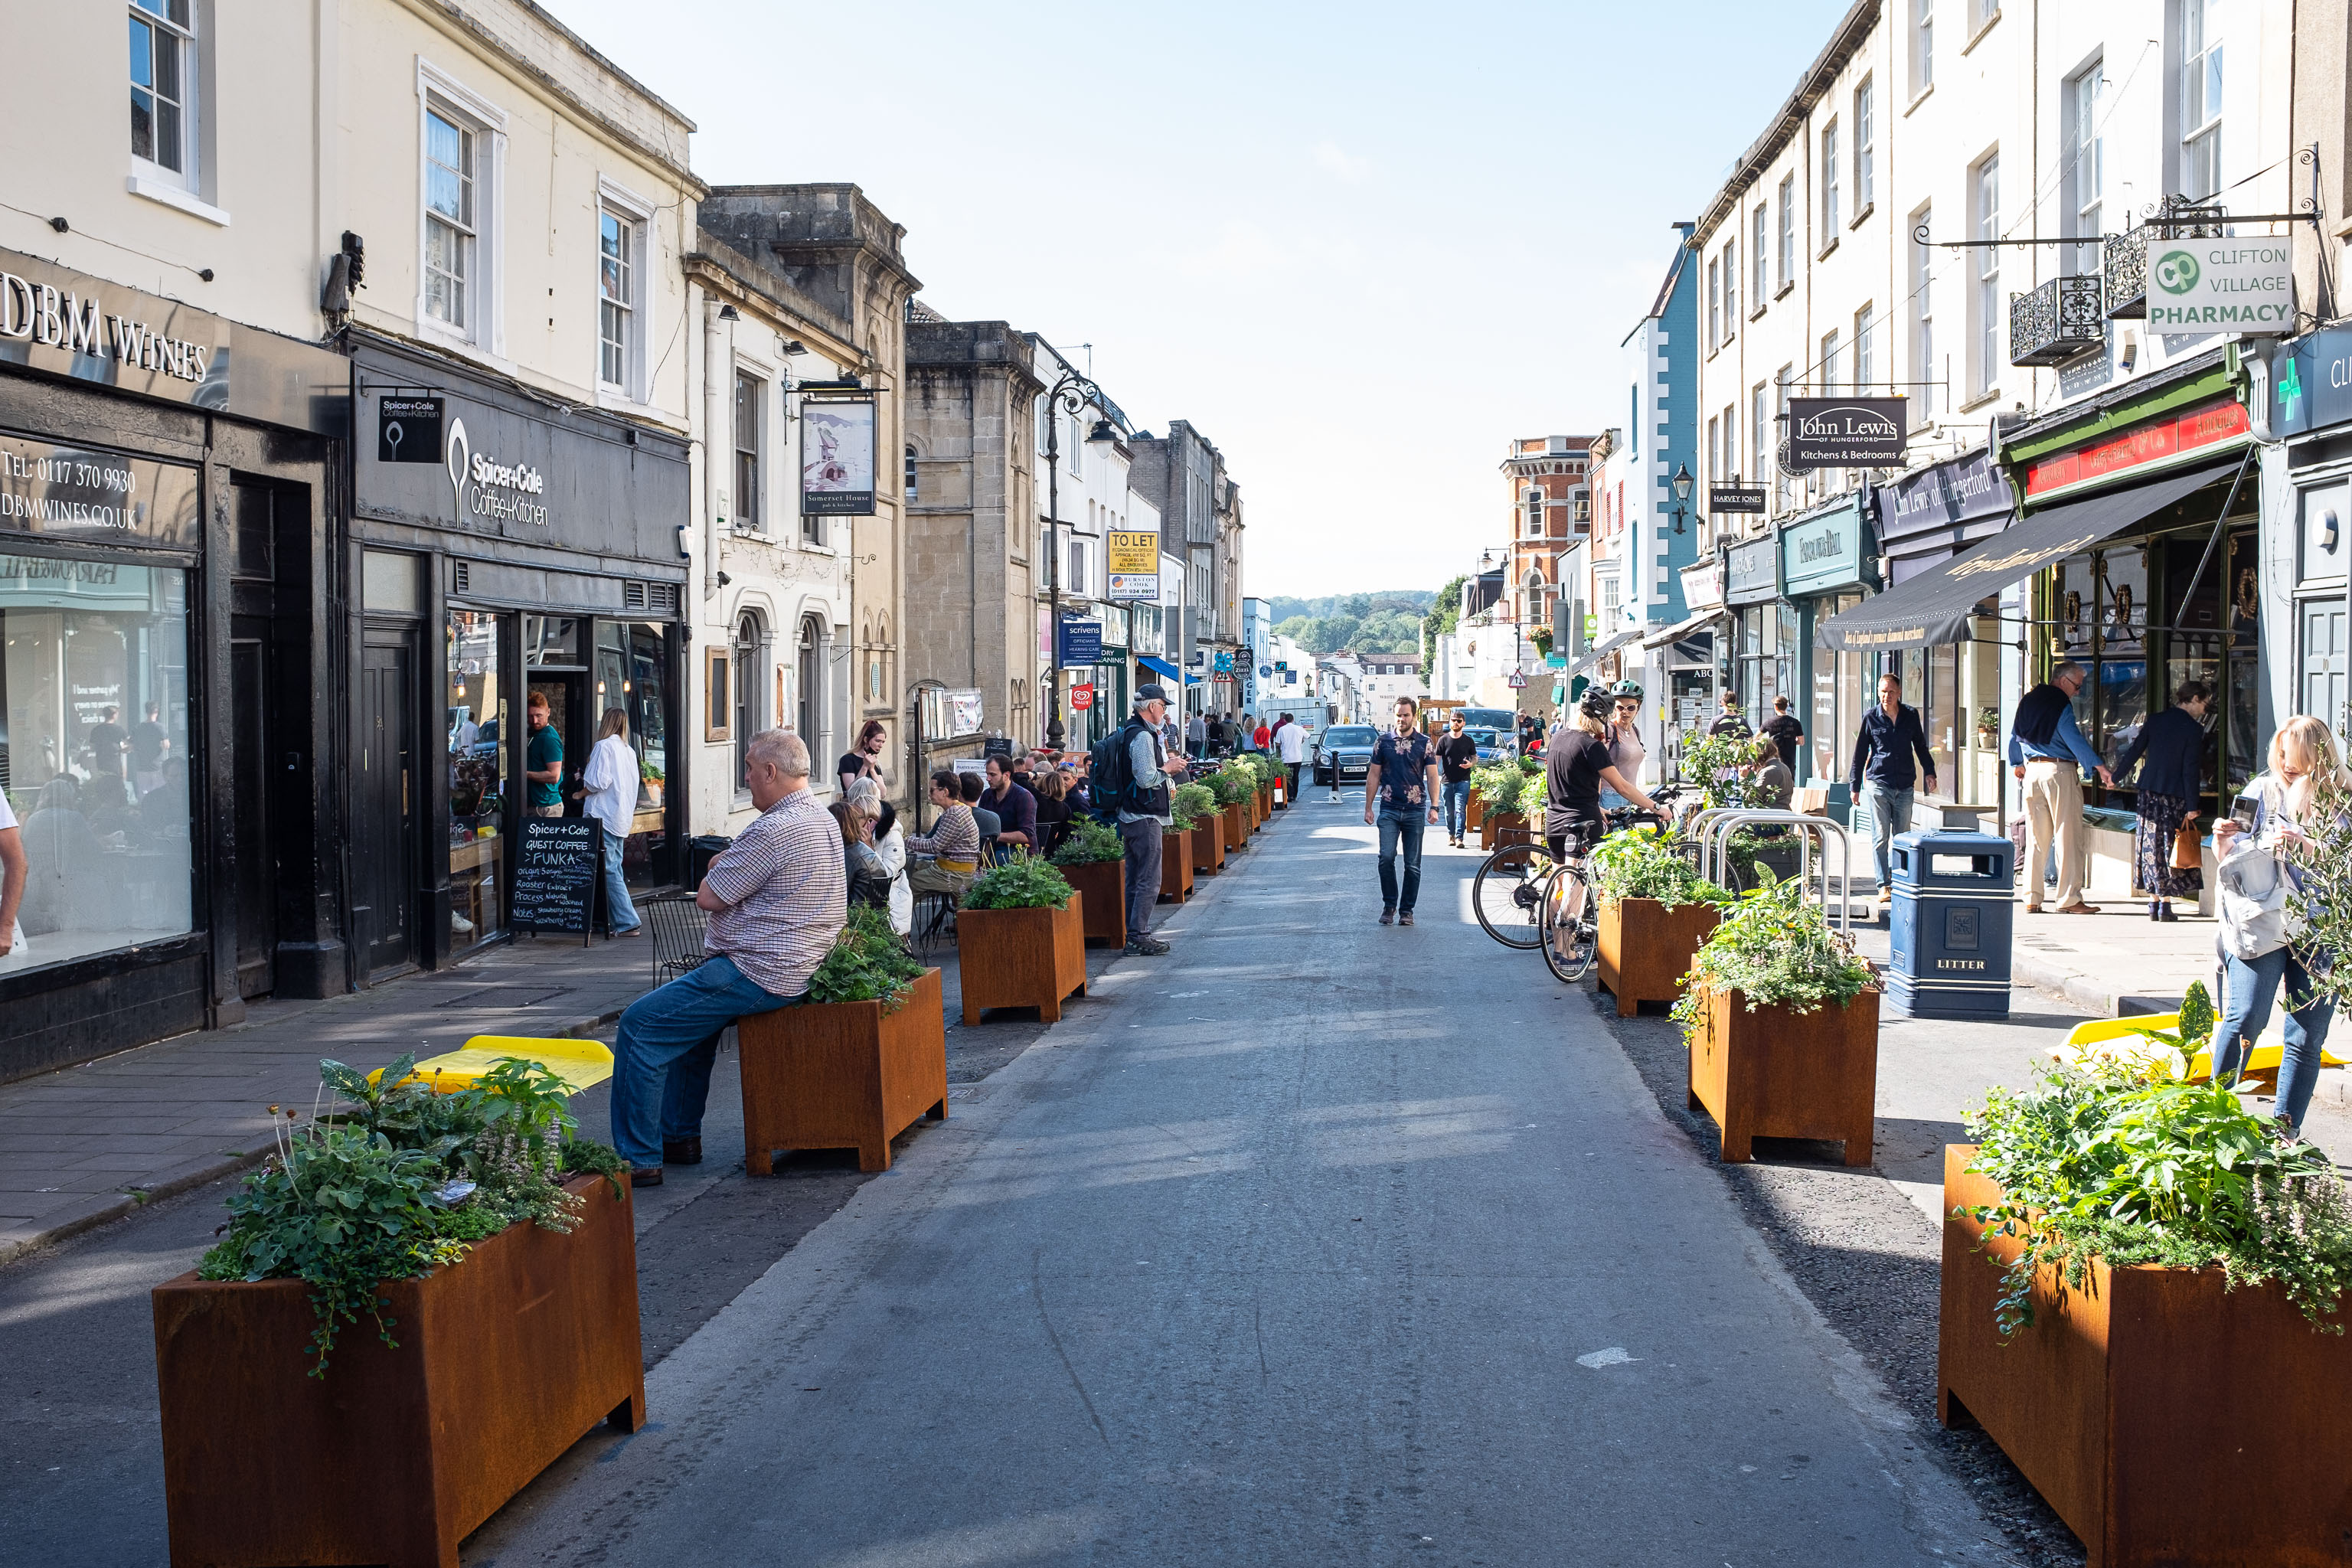 Pedestrianised Sunshine
Among the many arguments about this pedestrianisation experiment, there has been quite the sub-debate over the delightfully modern COR-TEN steel st...